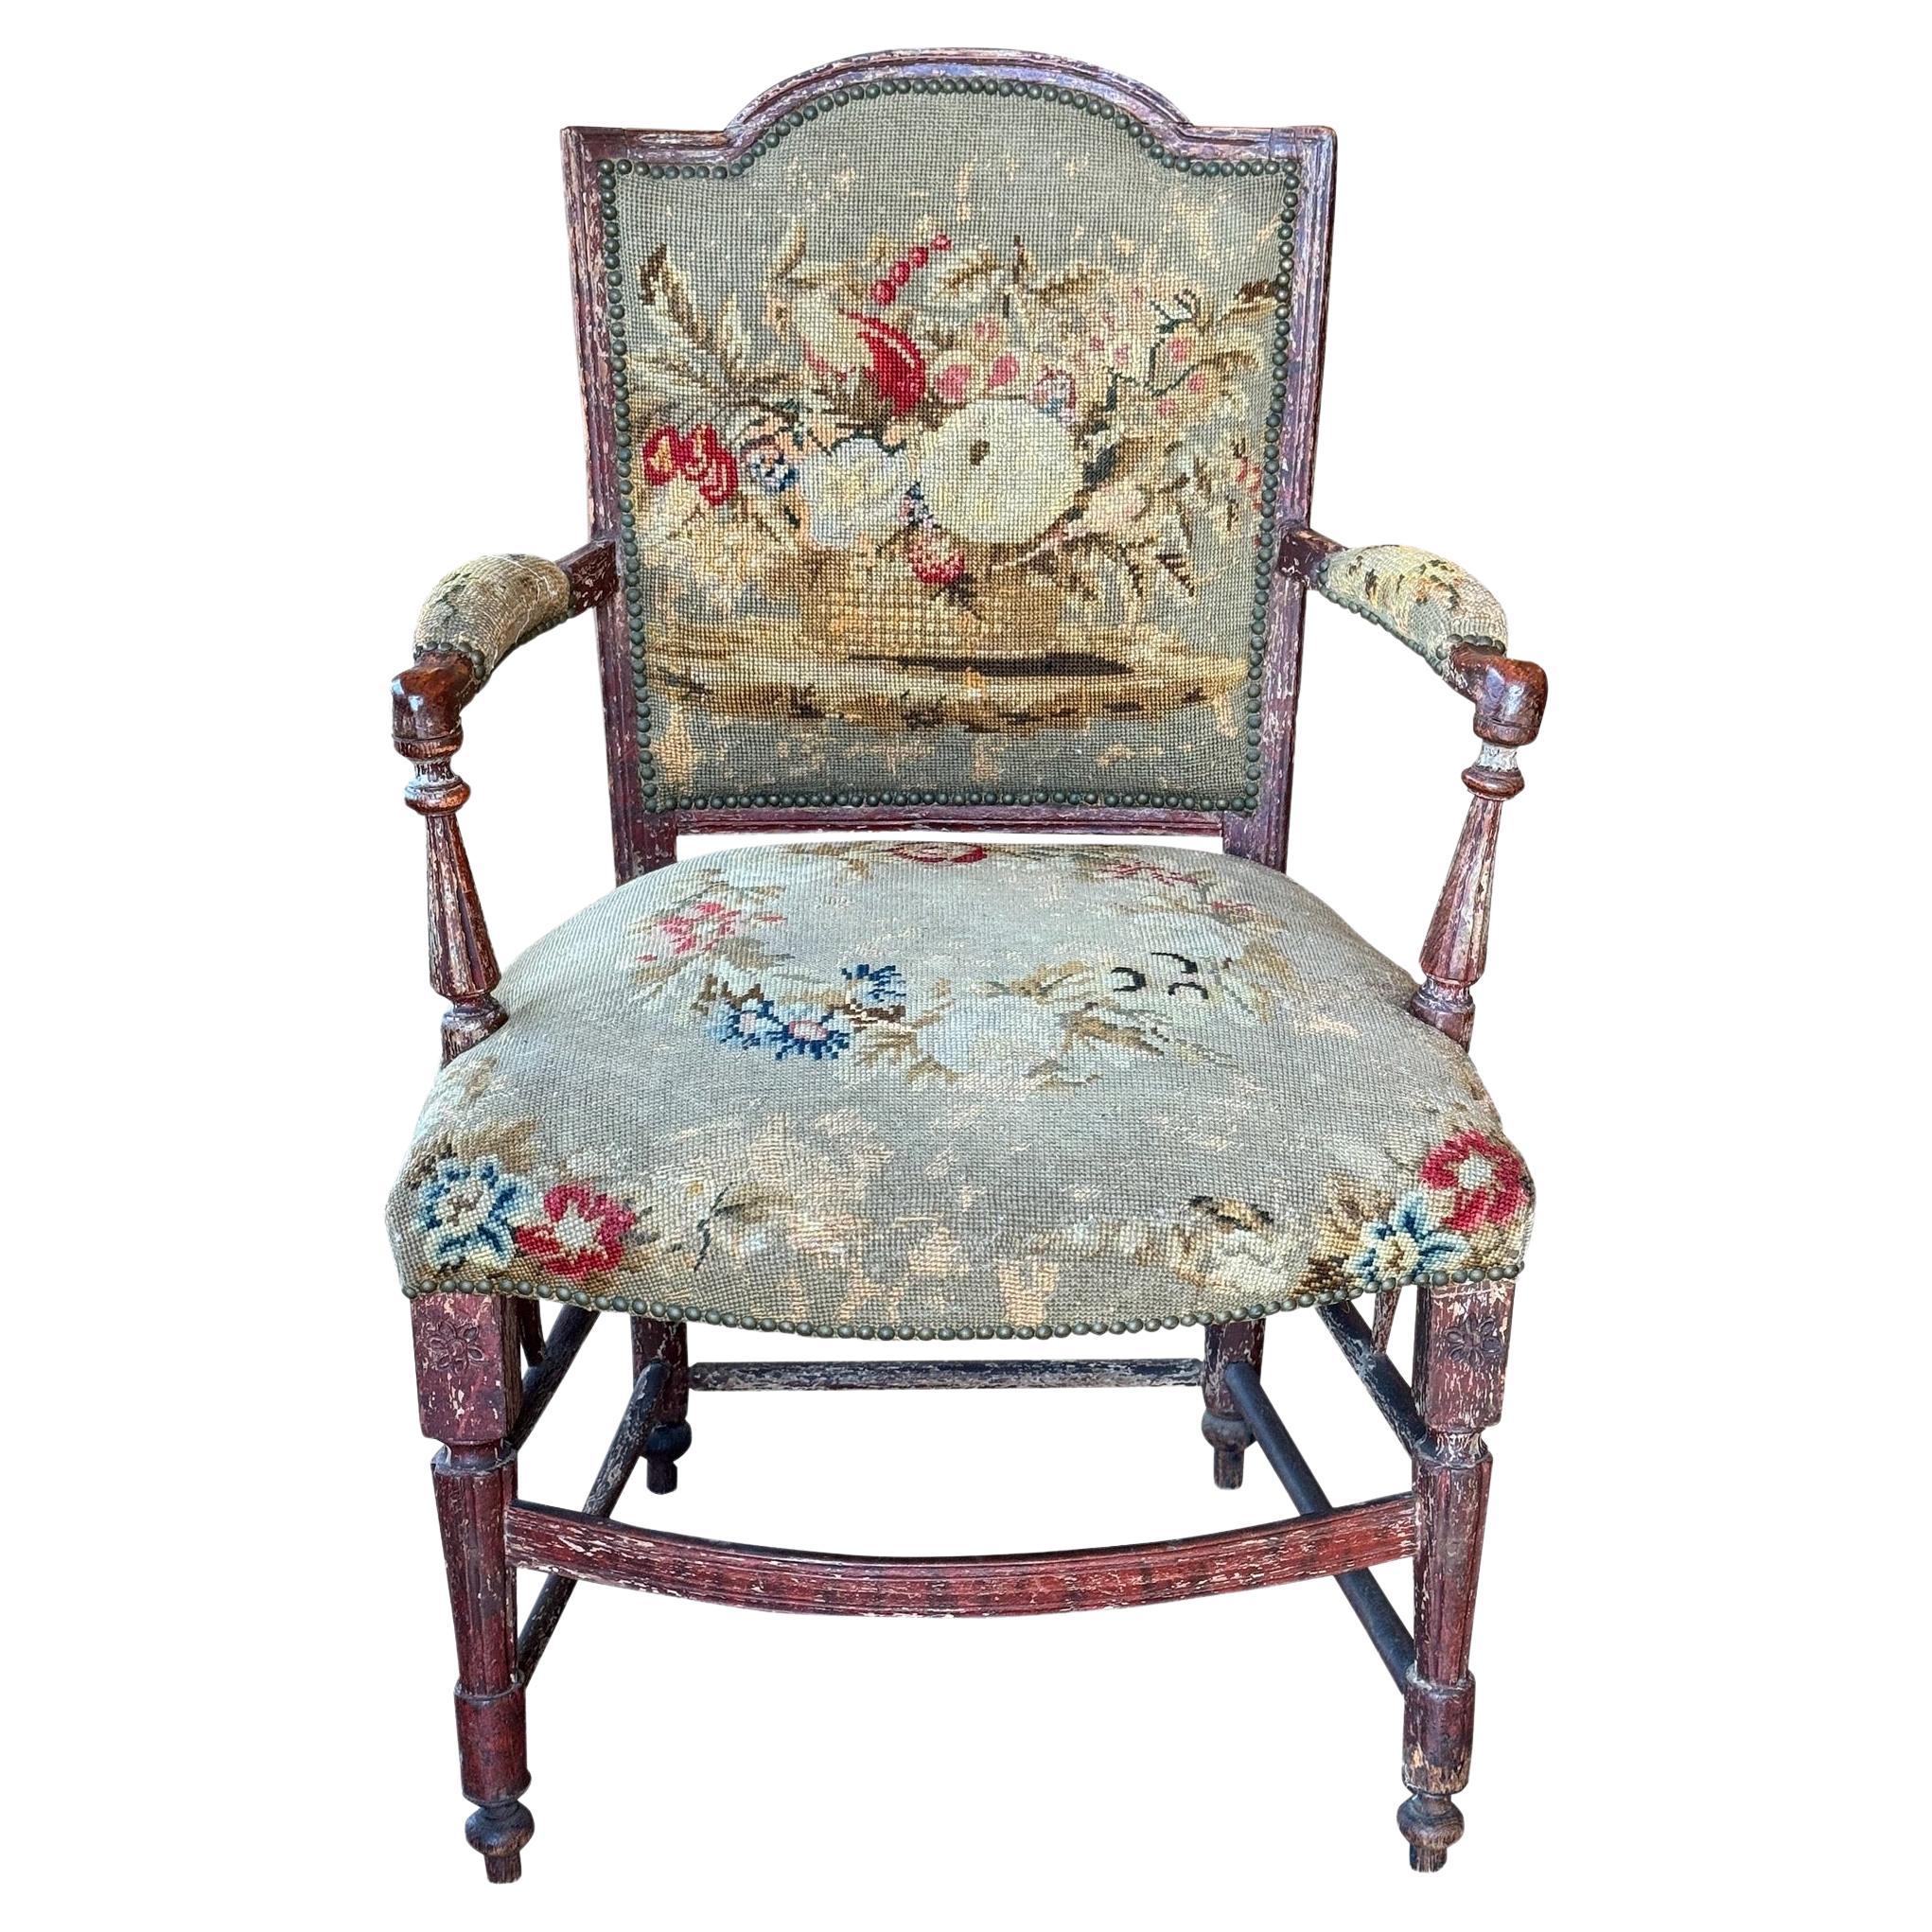 Early 19th Century French Painted Chair